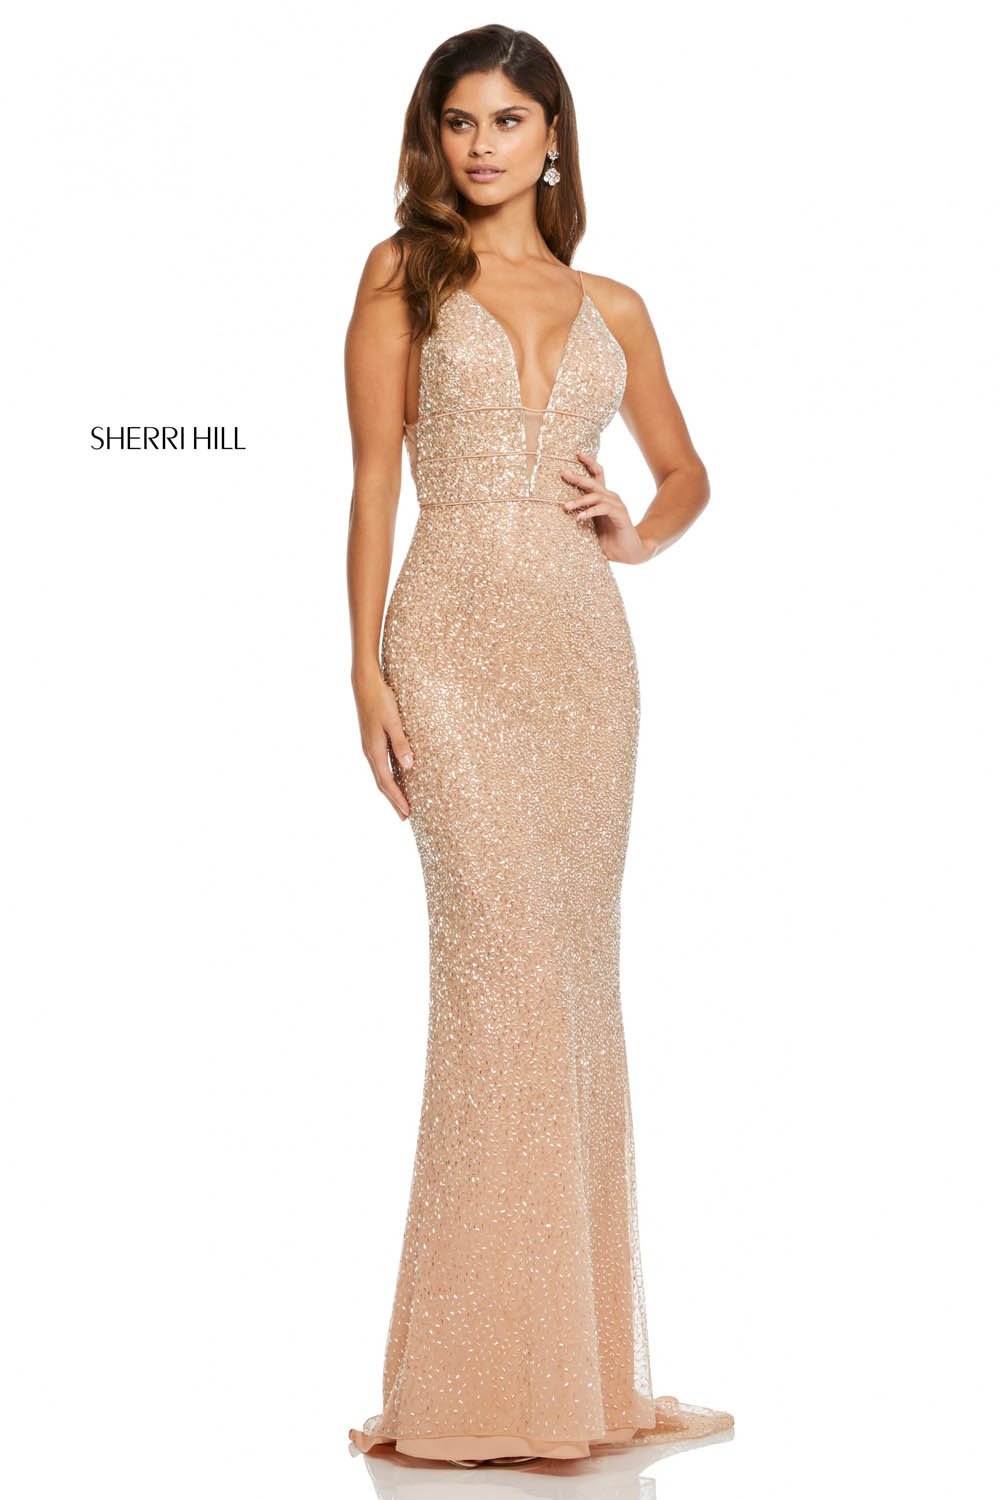 Sherri Hill 52689 dress images in these colors: Ivory, Blush, Light Blue, Yellow, Black, Red, Nude.